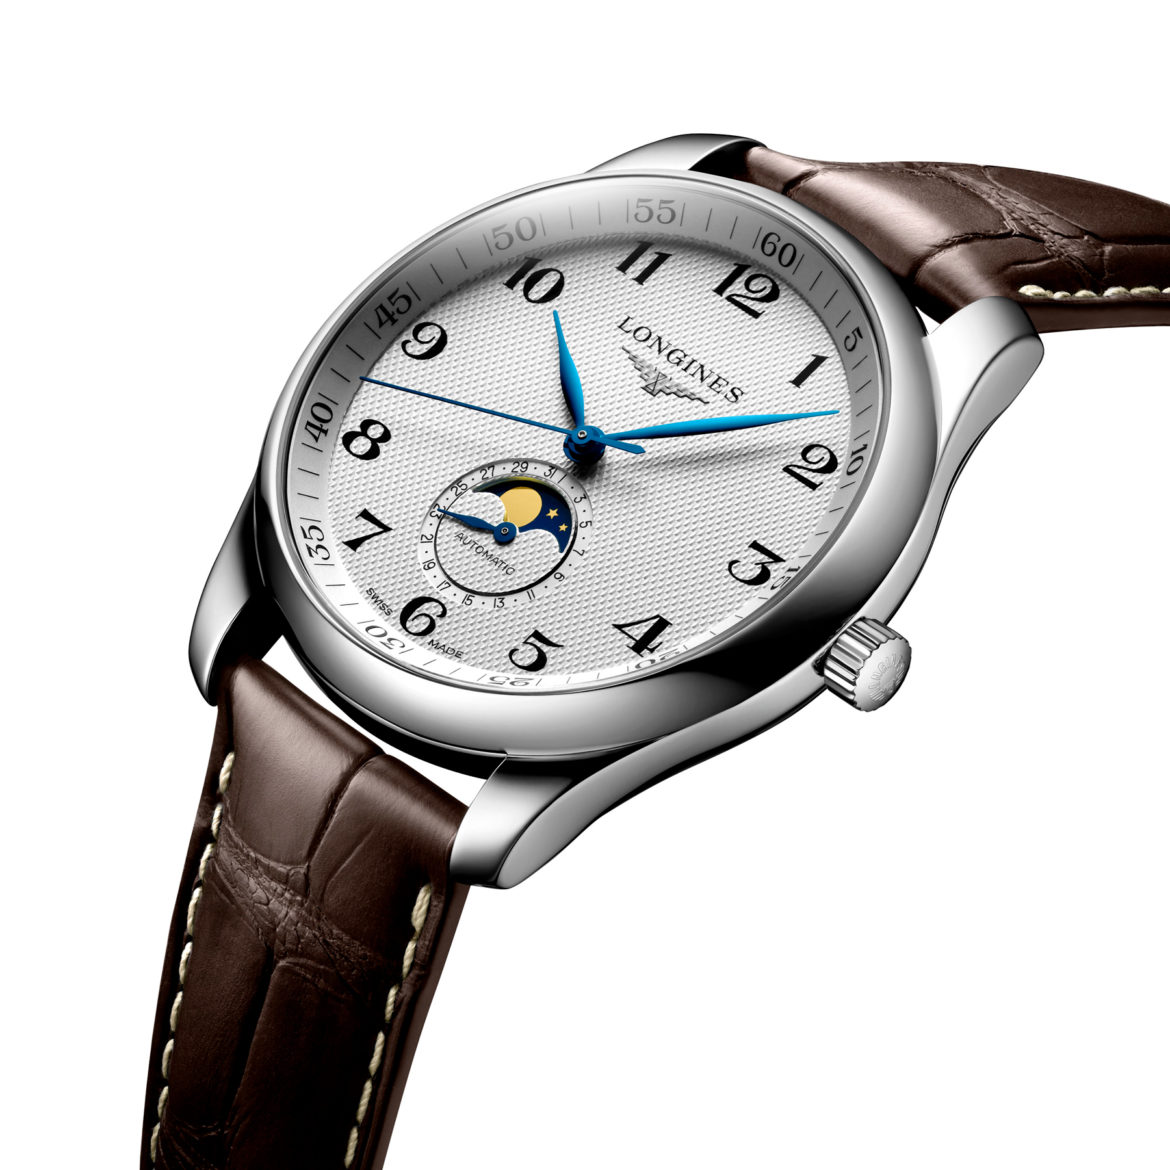 LONGINES</br>The Longines Master Collection </br>L29194783